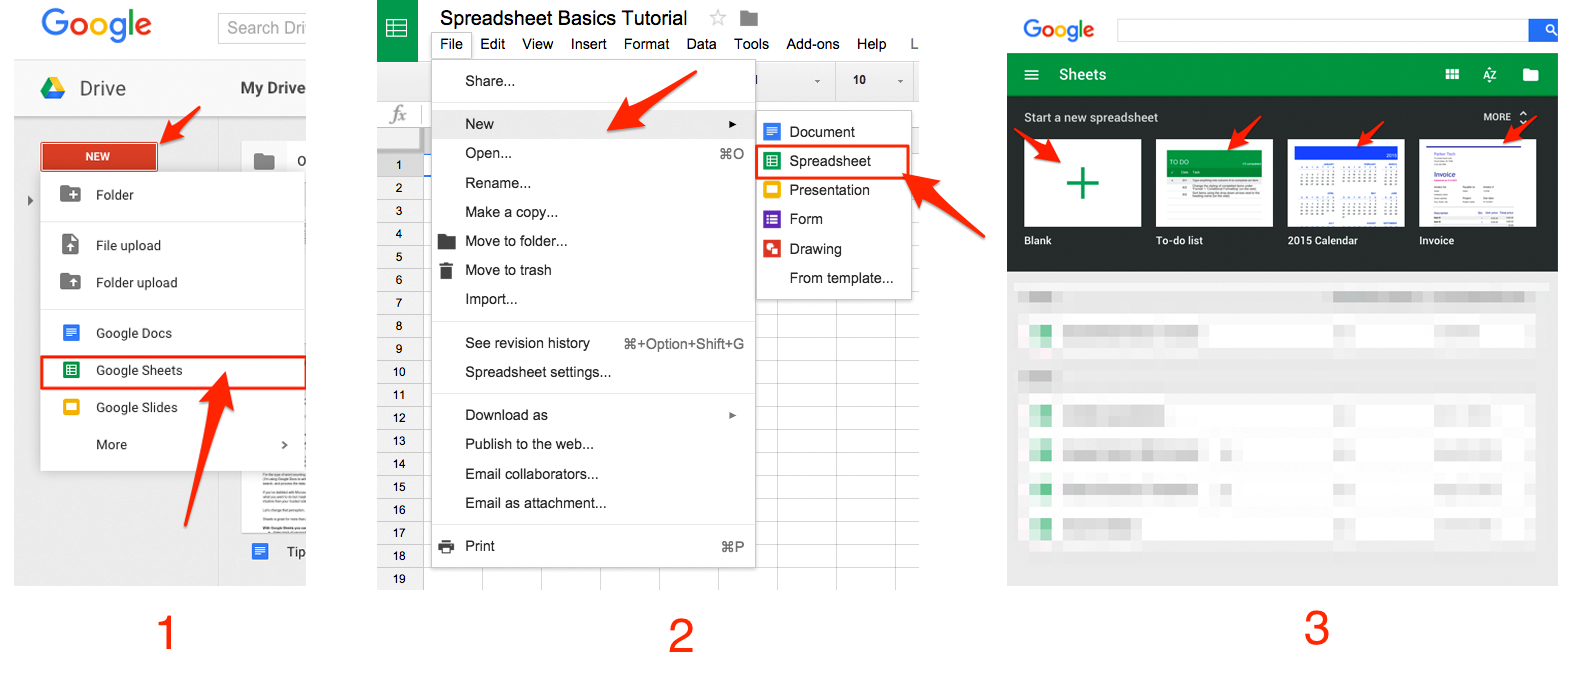 How To Download Spreadsheet Throughout Google Sheets 101: The Beginner's Guide To Online Spreadsheets  The